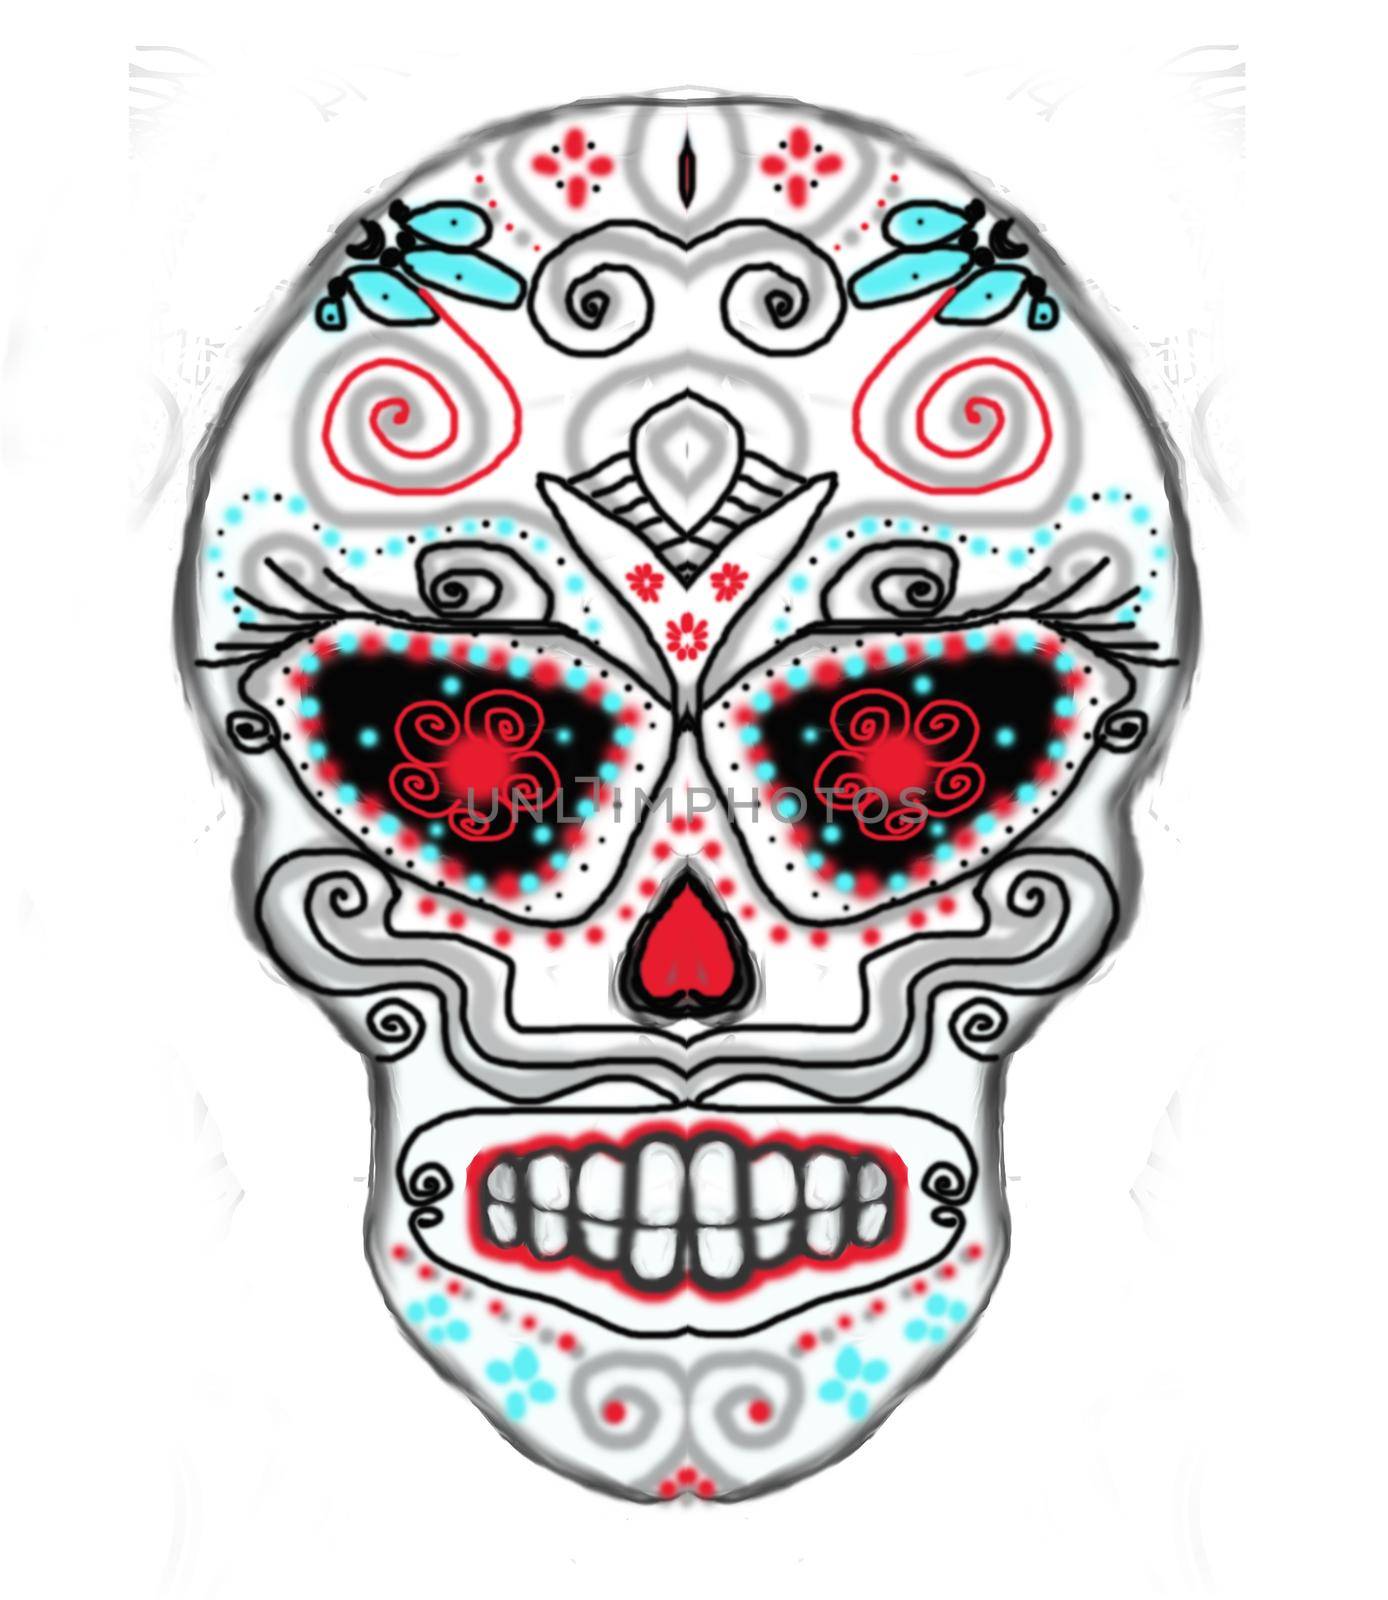 mexican skull - day of the dead